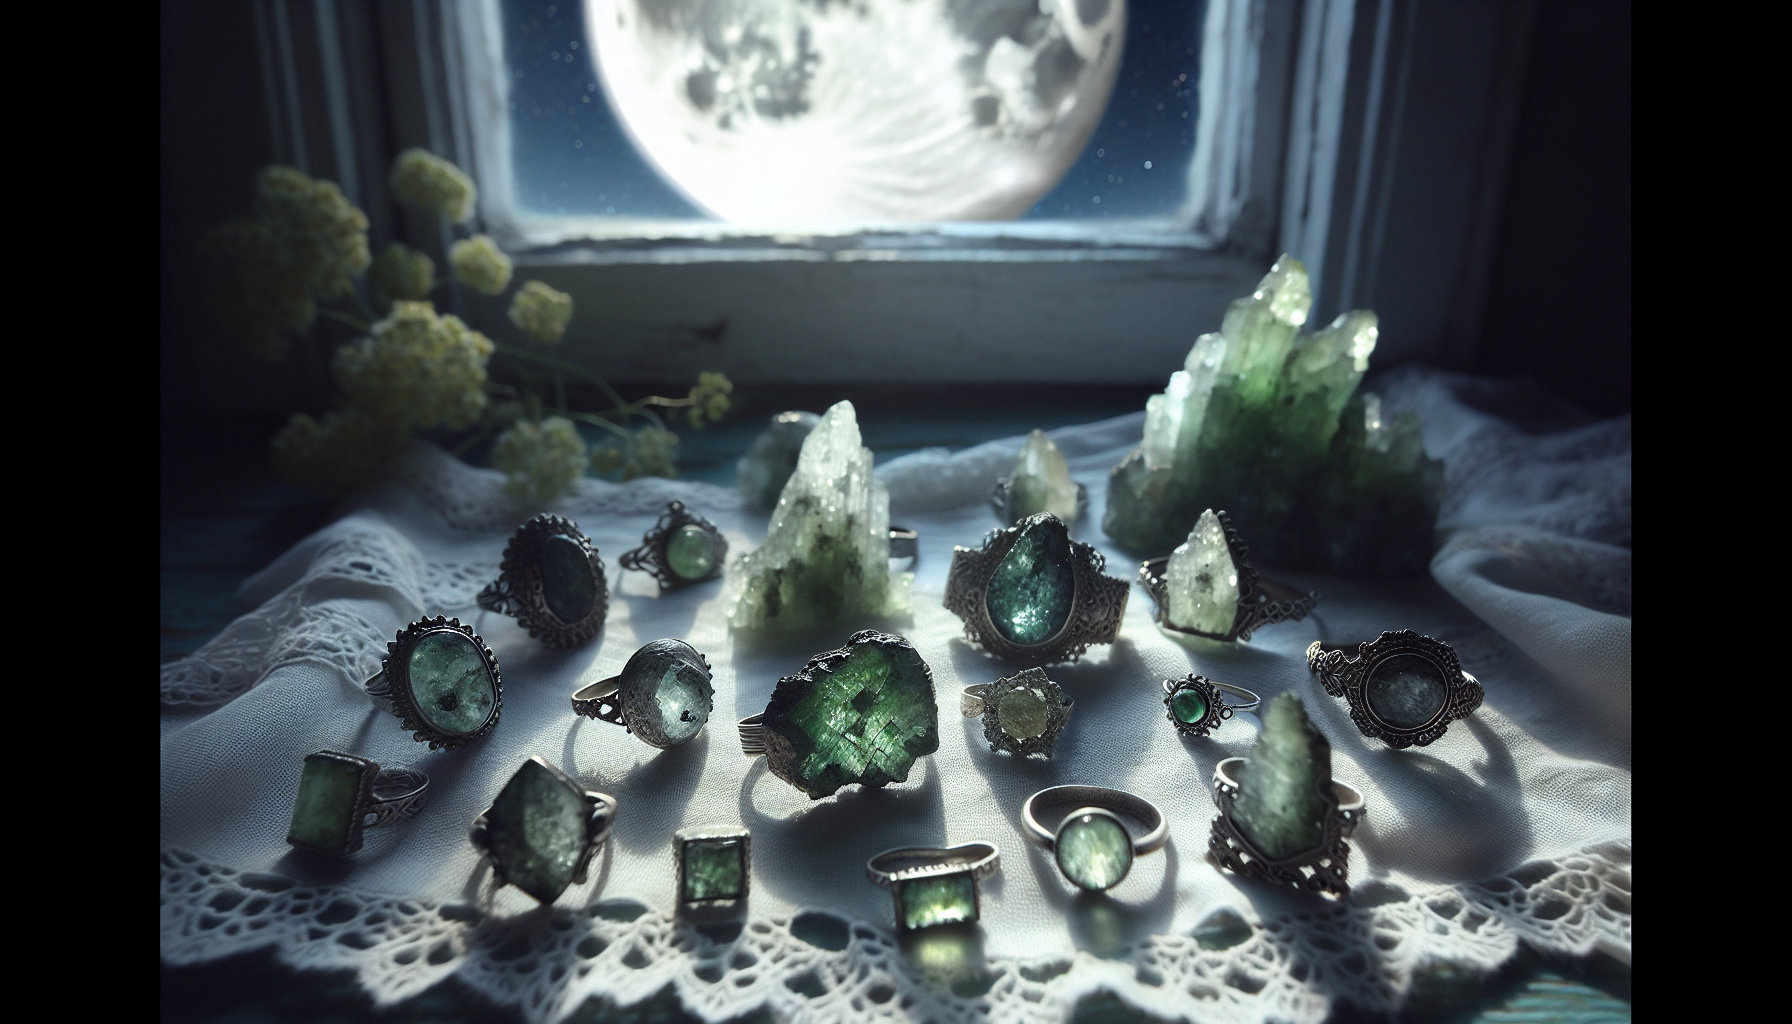 Moldavite jewelry being charged with moonlight